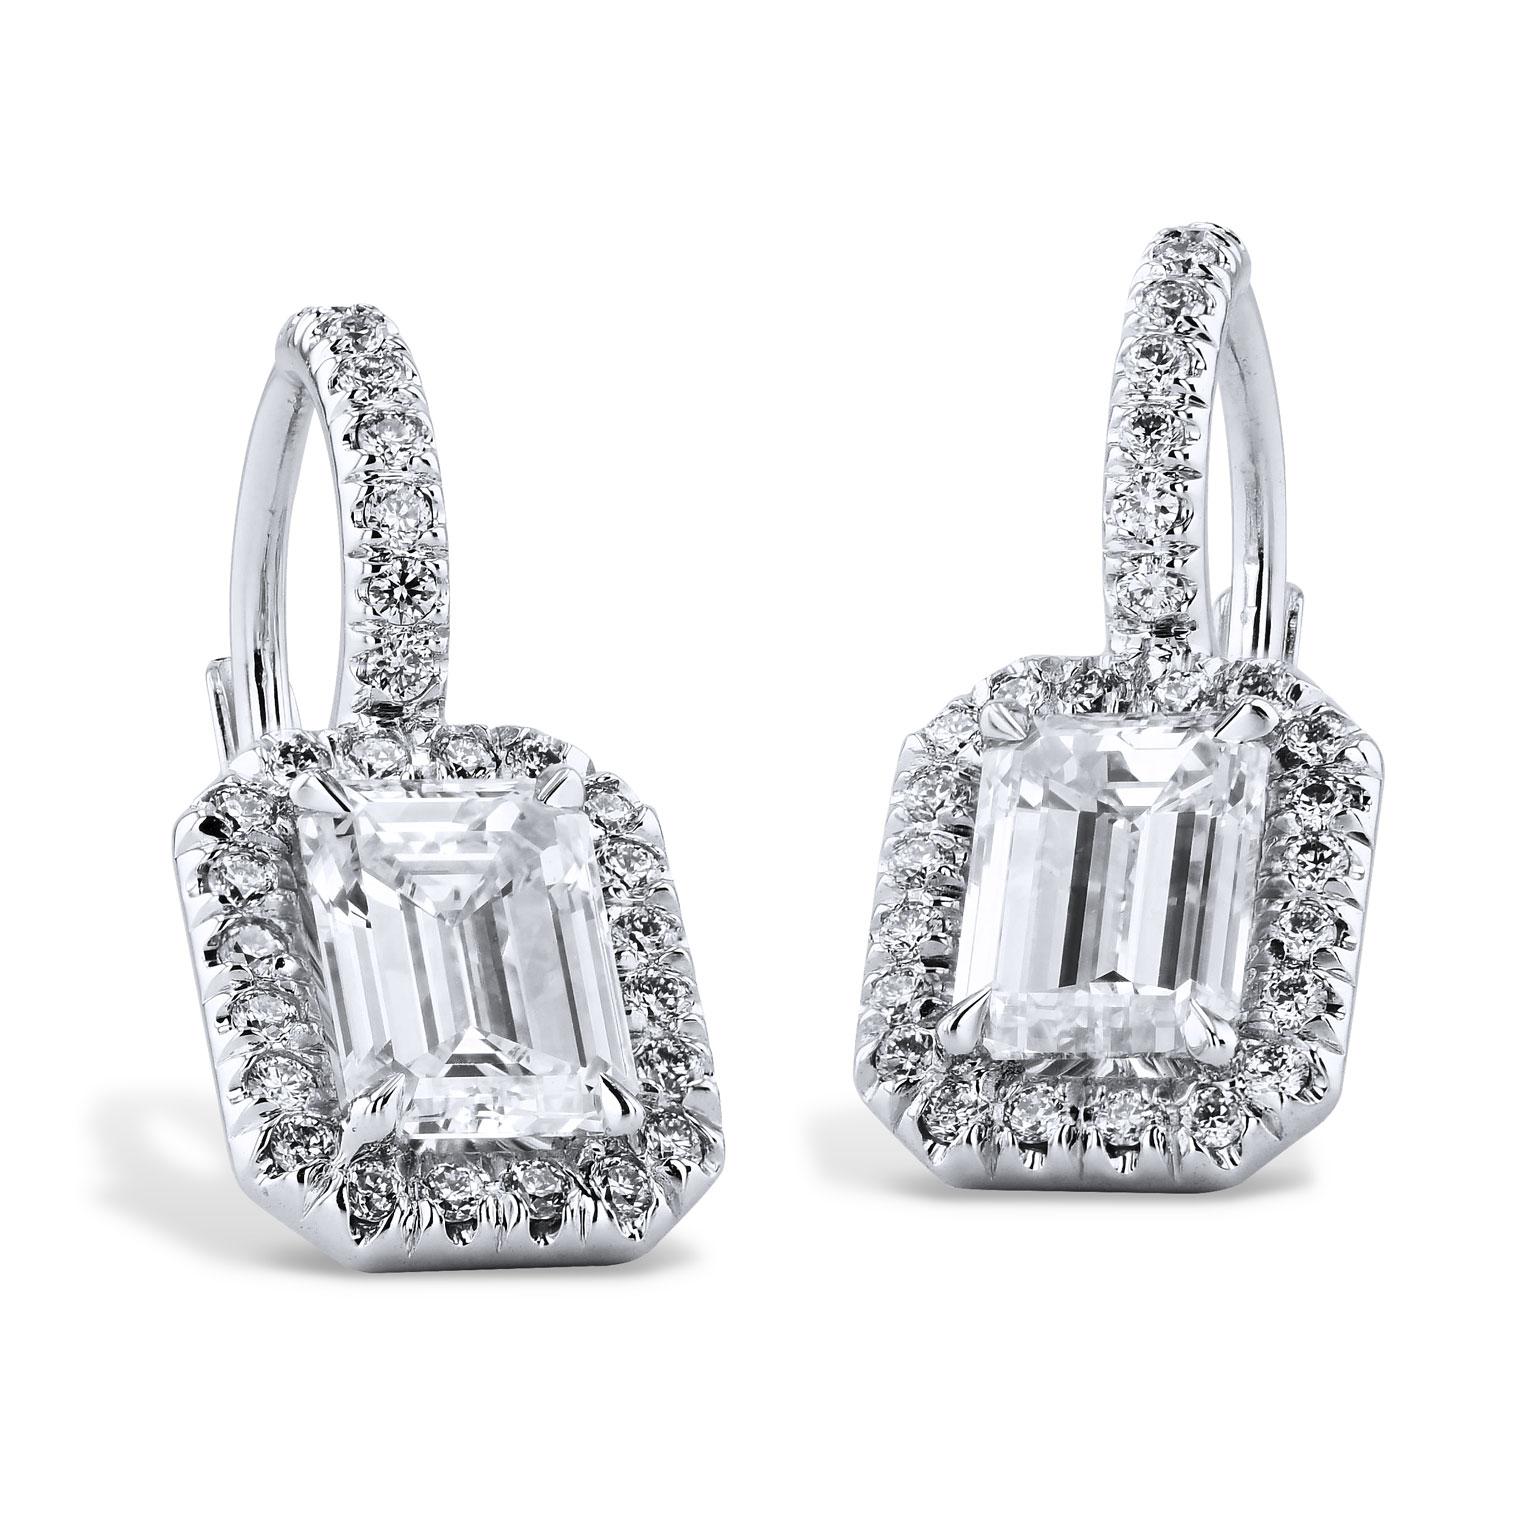 GIA Certified 1.81 carat total weight Emerald Cut Diamond White Gold Earrings 

These eye-catching diamond earrings are one of a kind and handmade by H&H Jewels.  They have a total weight of 1.81 carats in Emerald cut diamonds.  Both of the center